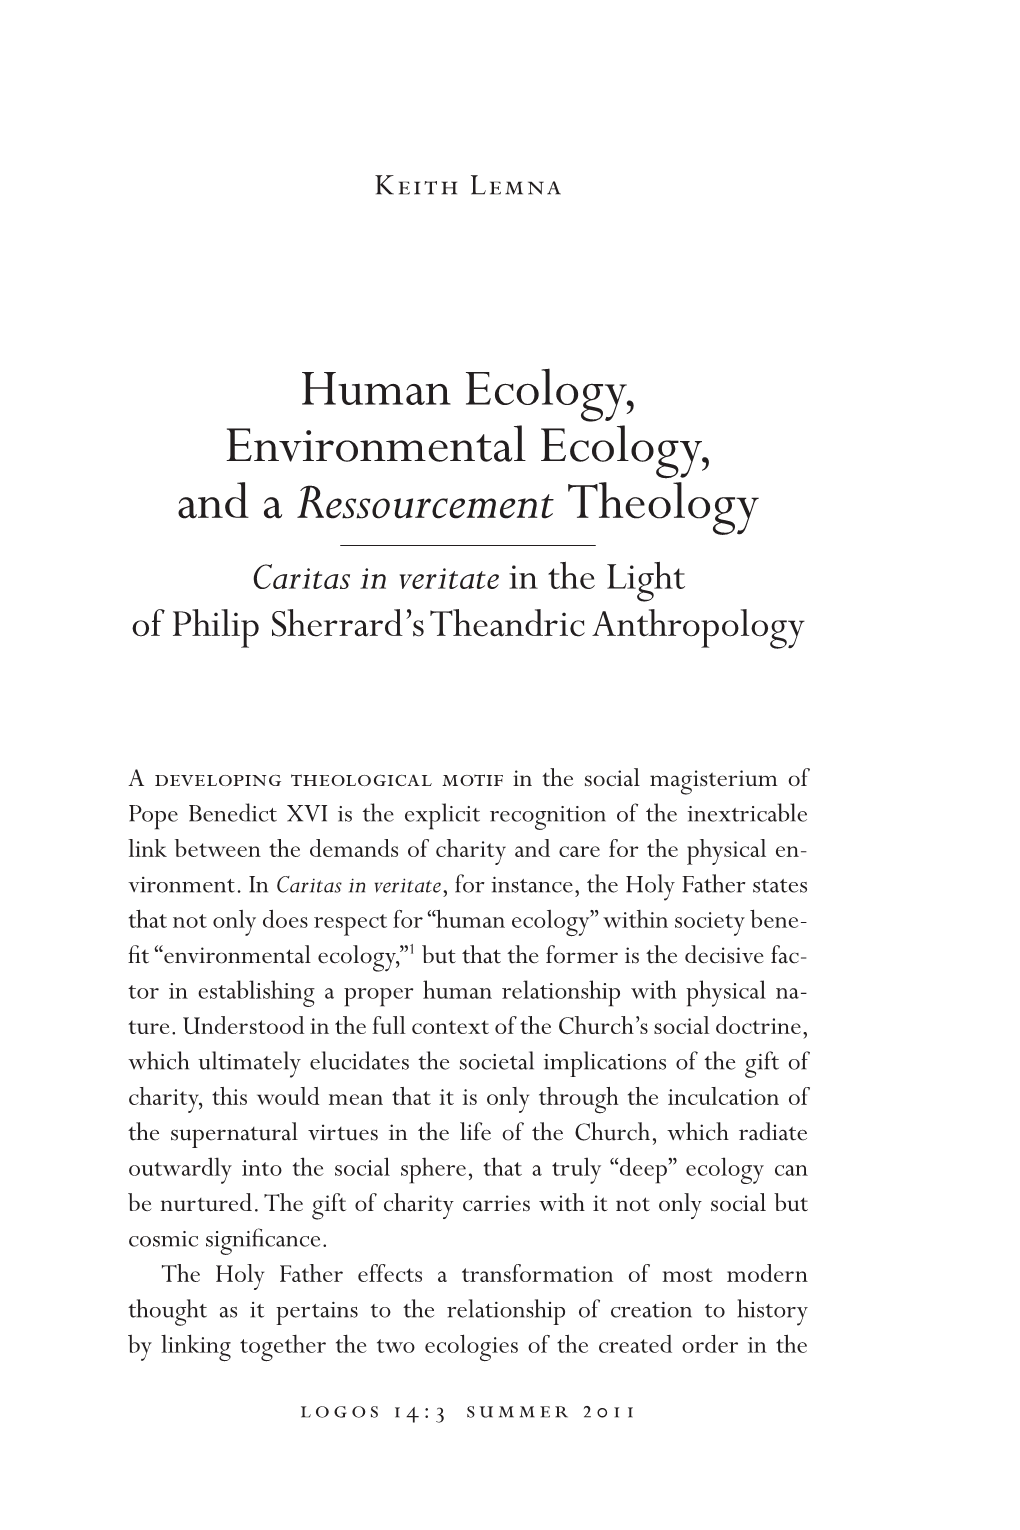 Human Ecology, Environmental Ecology, and a Ressourcement Theology Caritas in Veritate in the Light of Philip Sherrard’S Theandric Anthropology